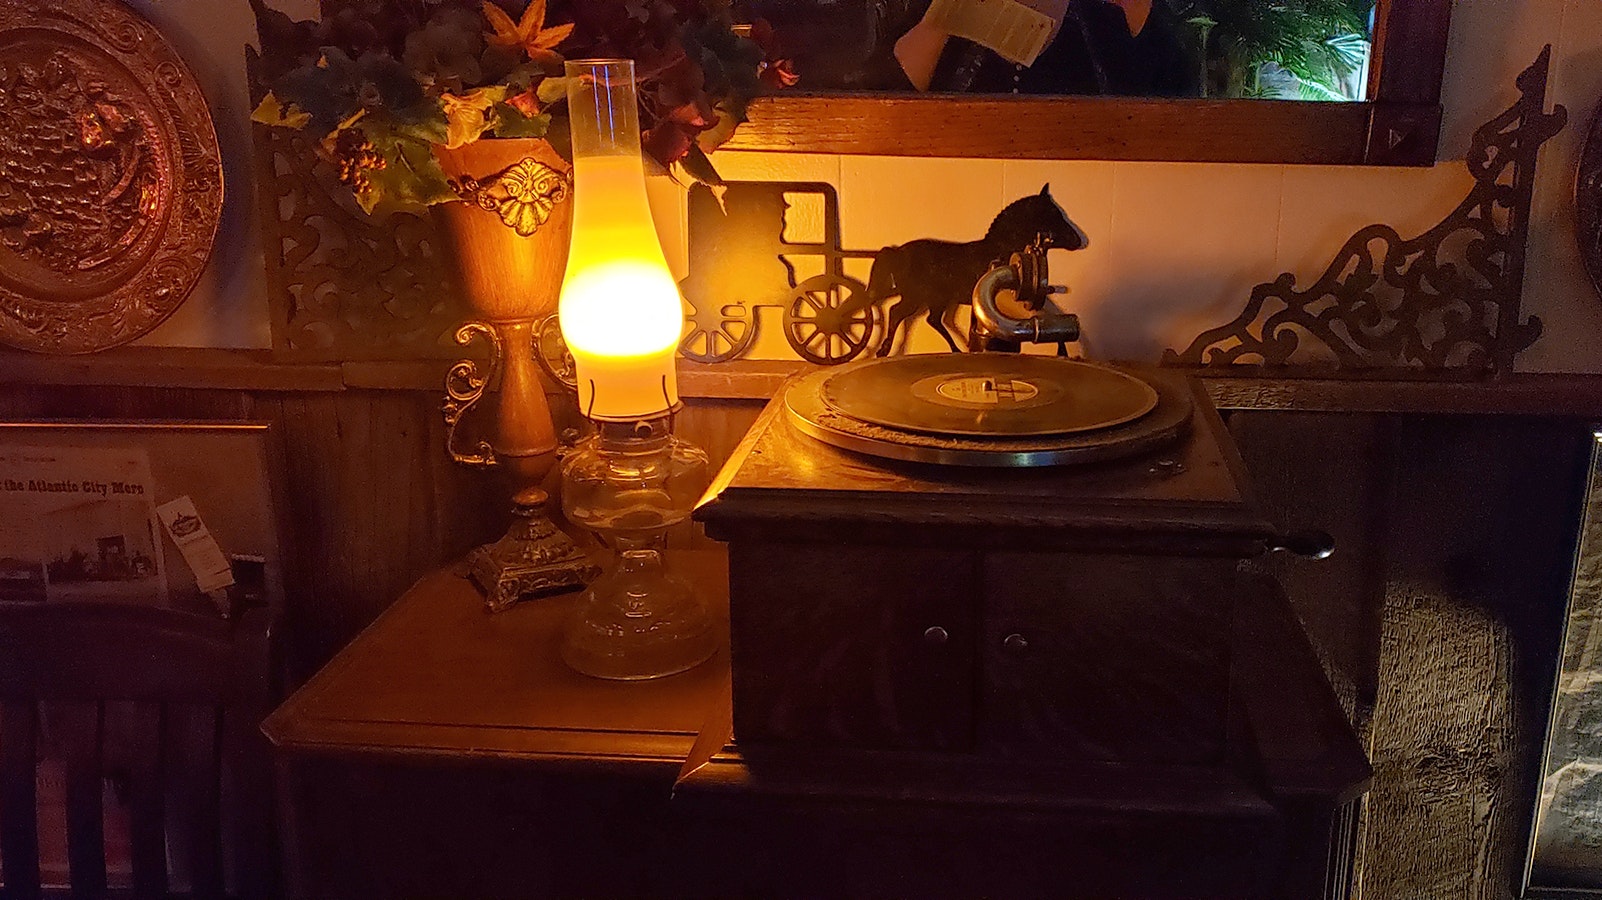 An old victrola is among the many antiques in the restaurant.